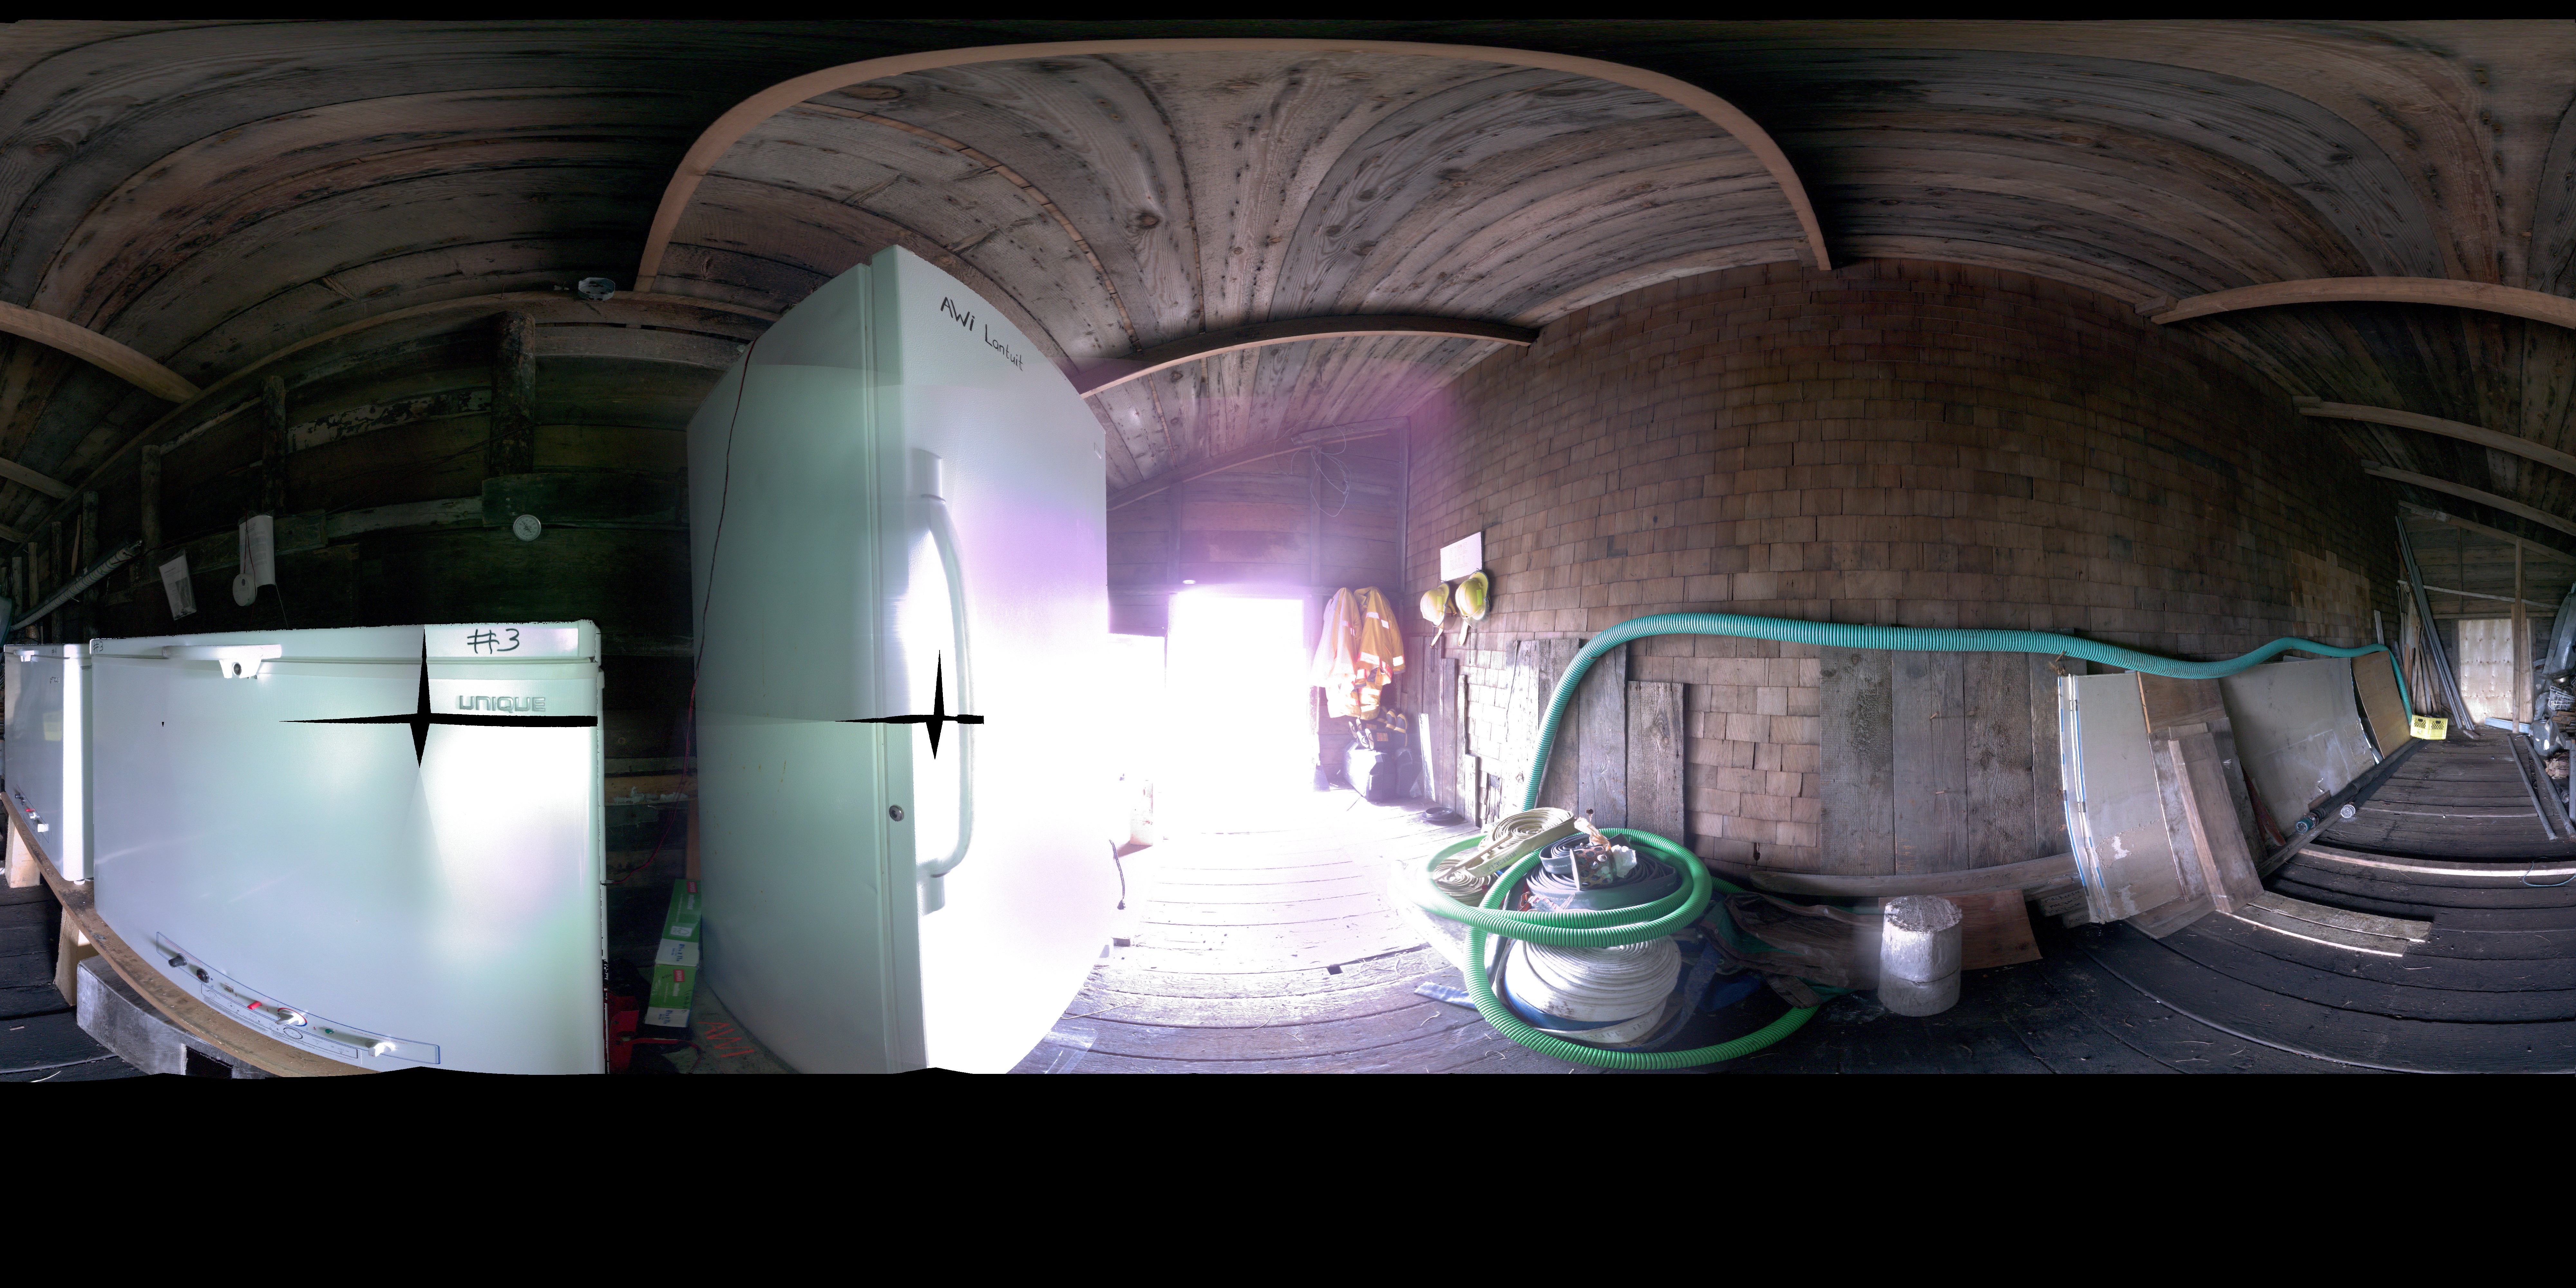 Panoramic view of the Pacific Steam Whaling Co. Bonehouse interior from the Leica BKL 360, scanning location 5